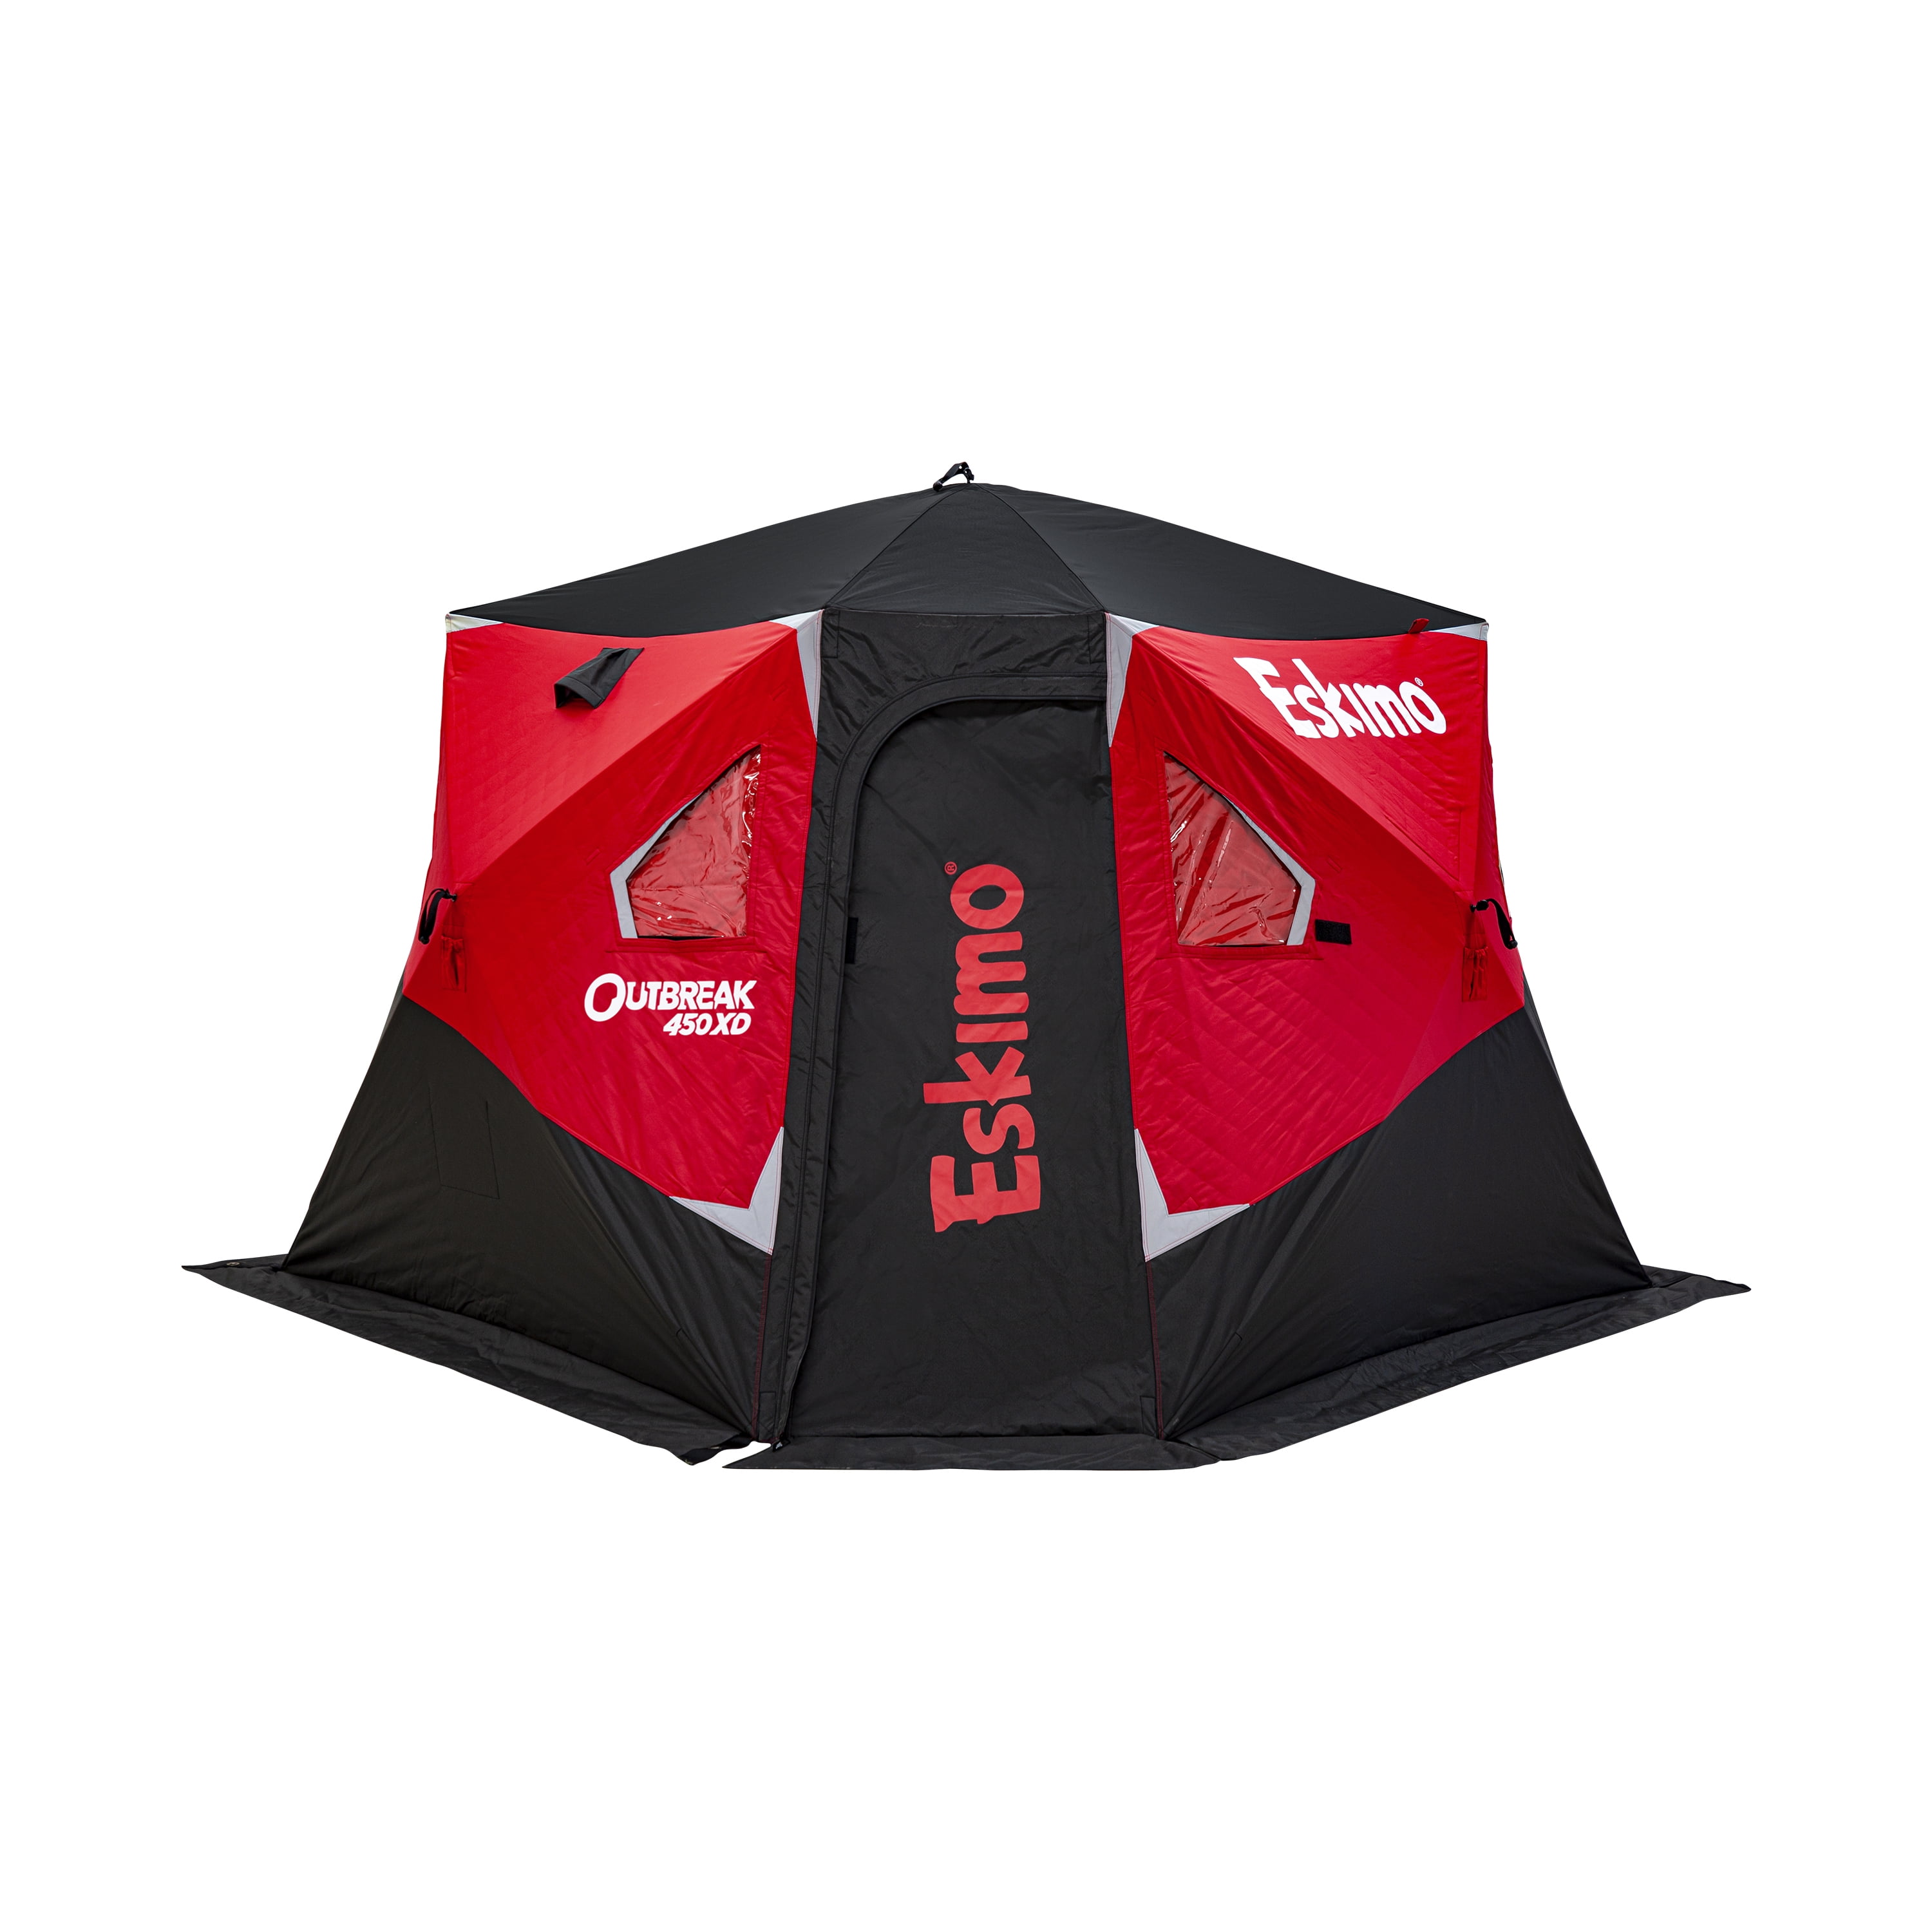 Eskimo 40450 Outbreak 450XD Insulated Ice Fishing Shelter, 4-5 Person